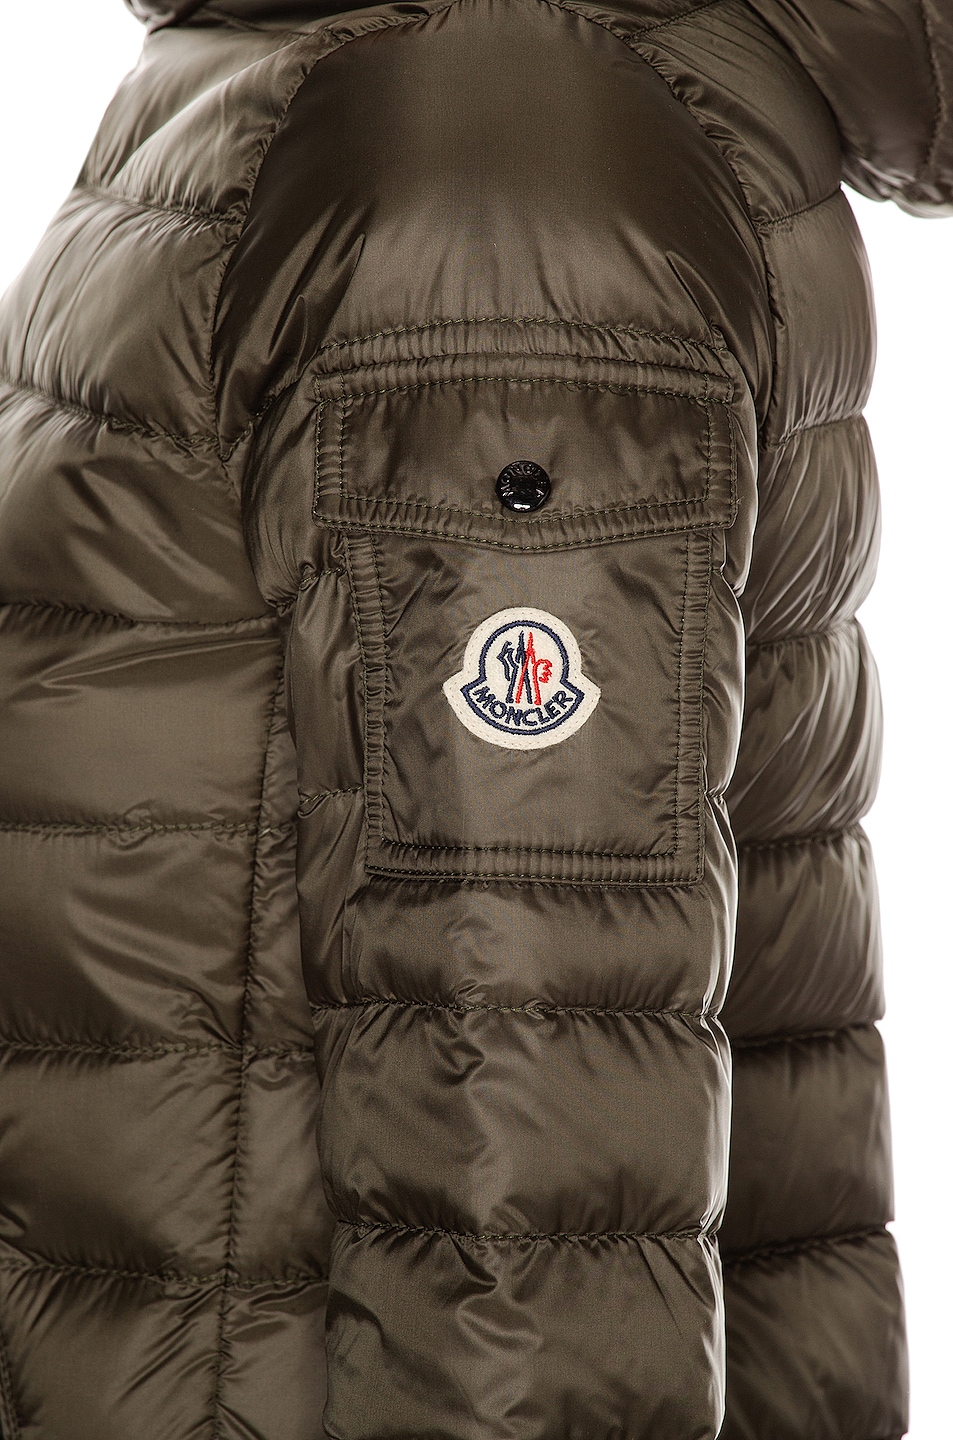 Moncler Bles Giubbotto Jacket in Military | FWRD